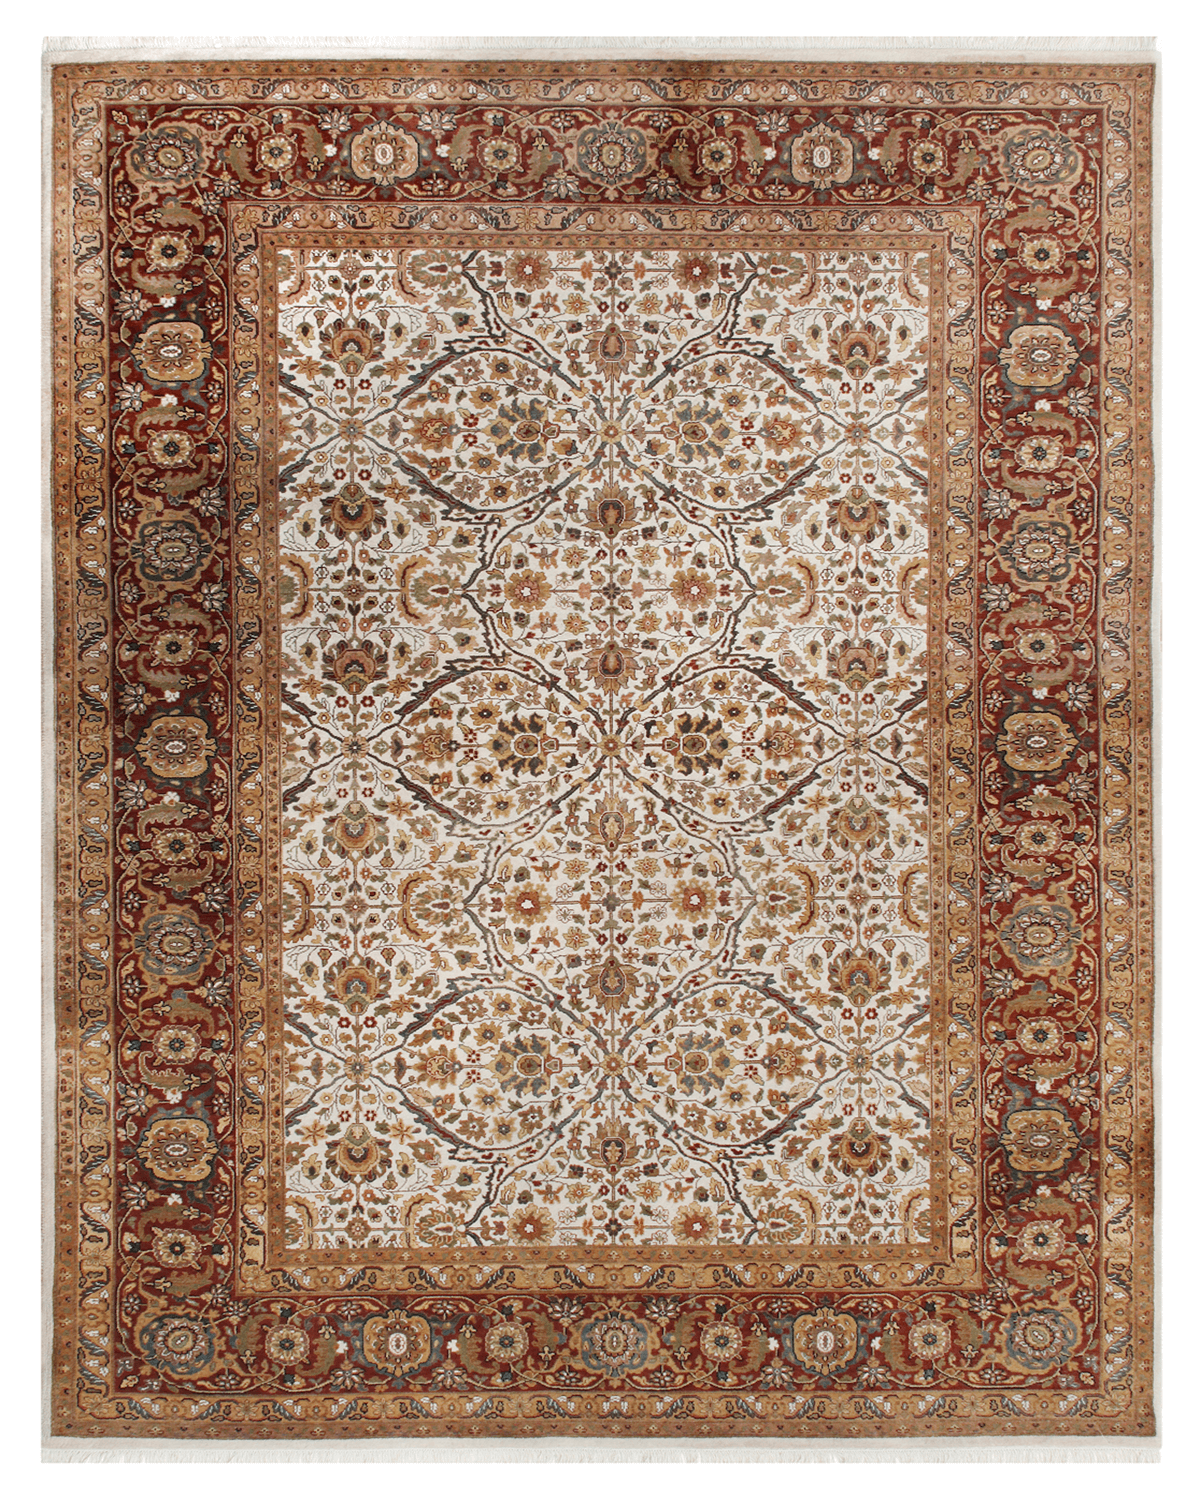 Hand-knotted Traditional Rug (Ziegler-191)